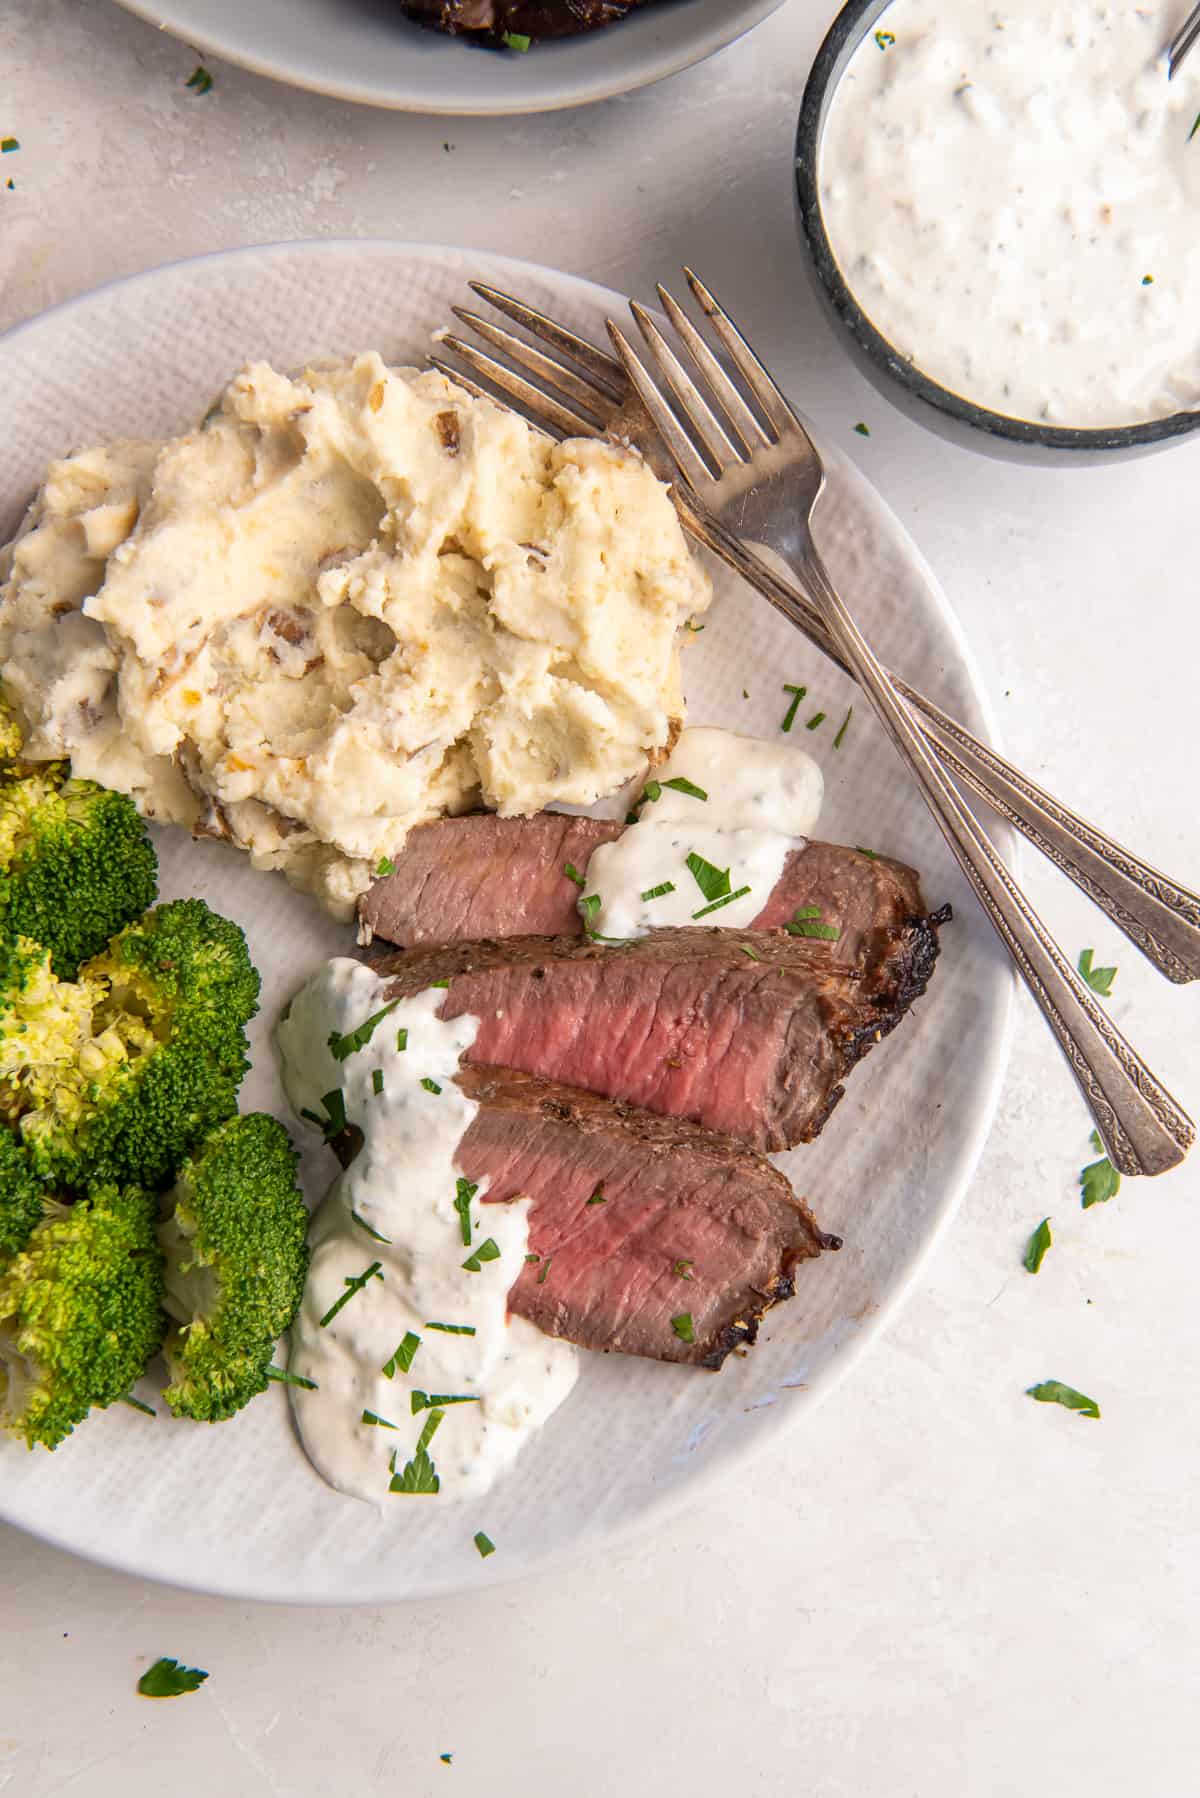 Slices of London Boil topped with a creamy sauce on a white plate with broccoli and mashed potatoes.